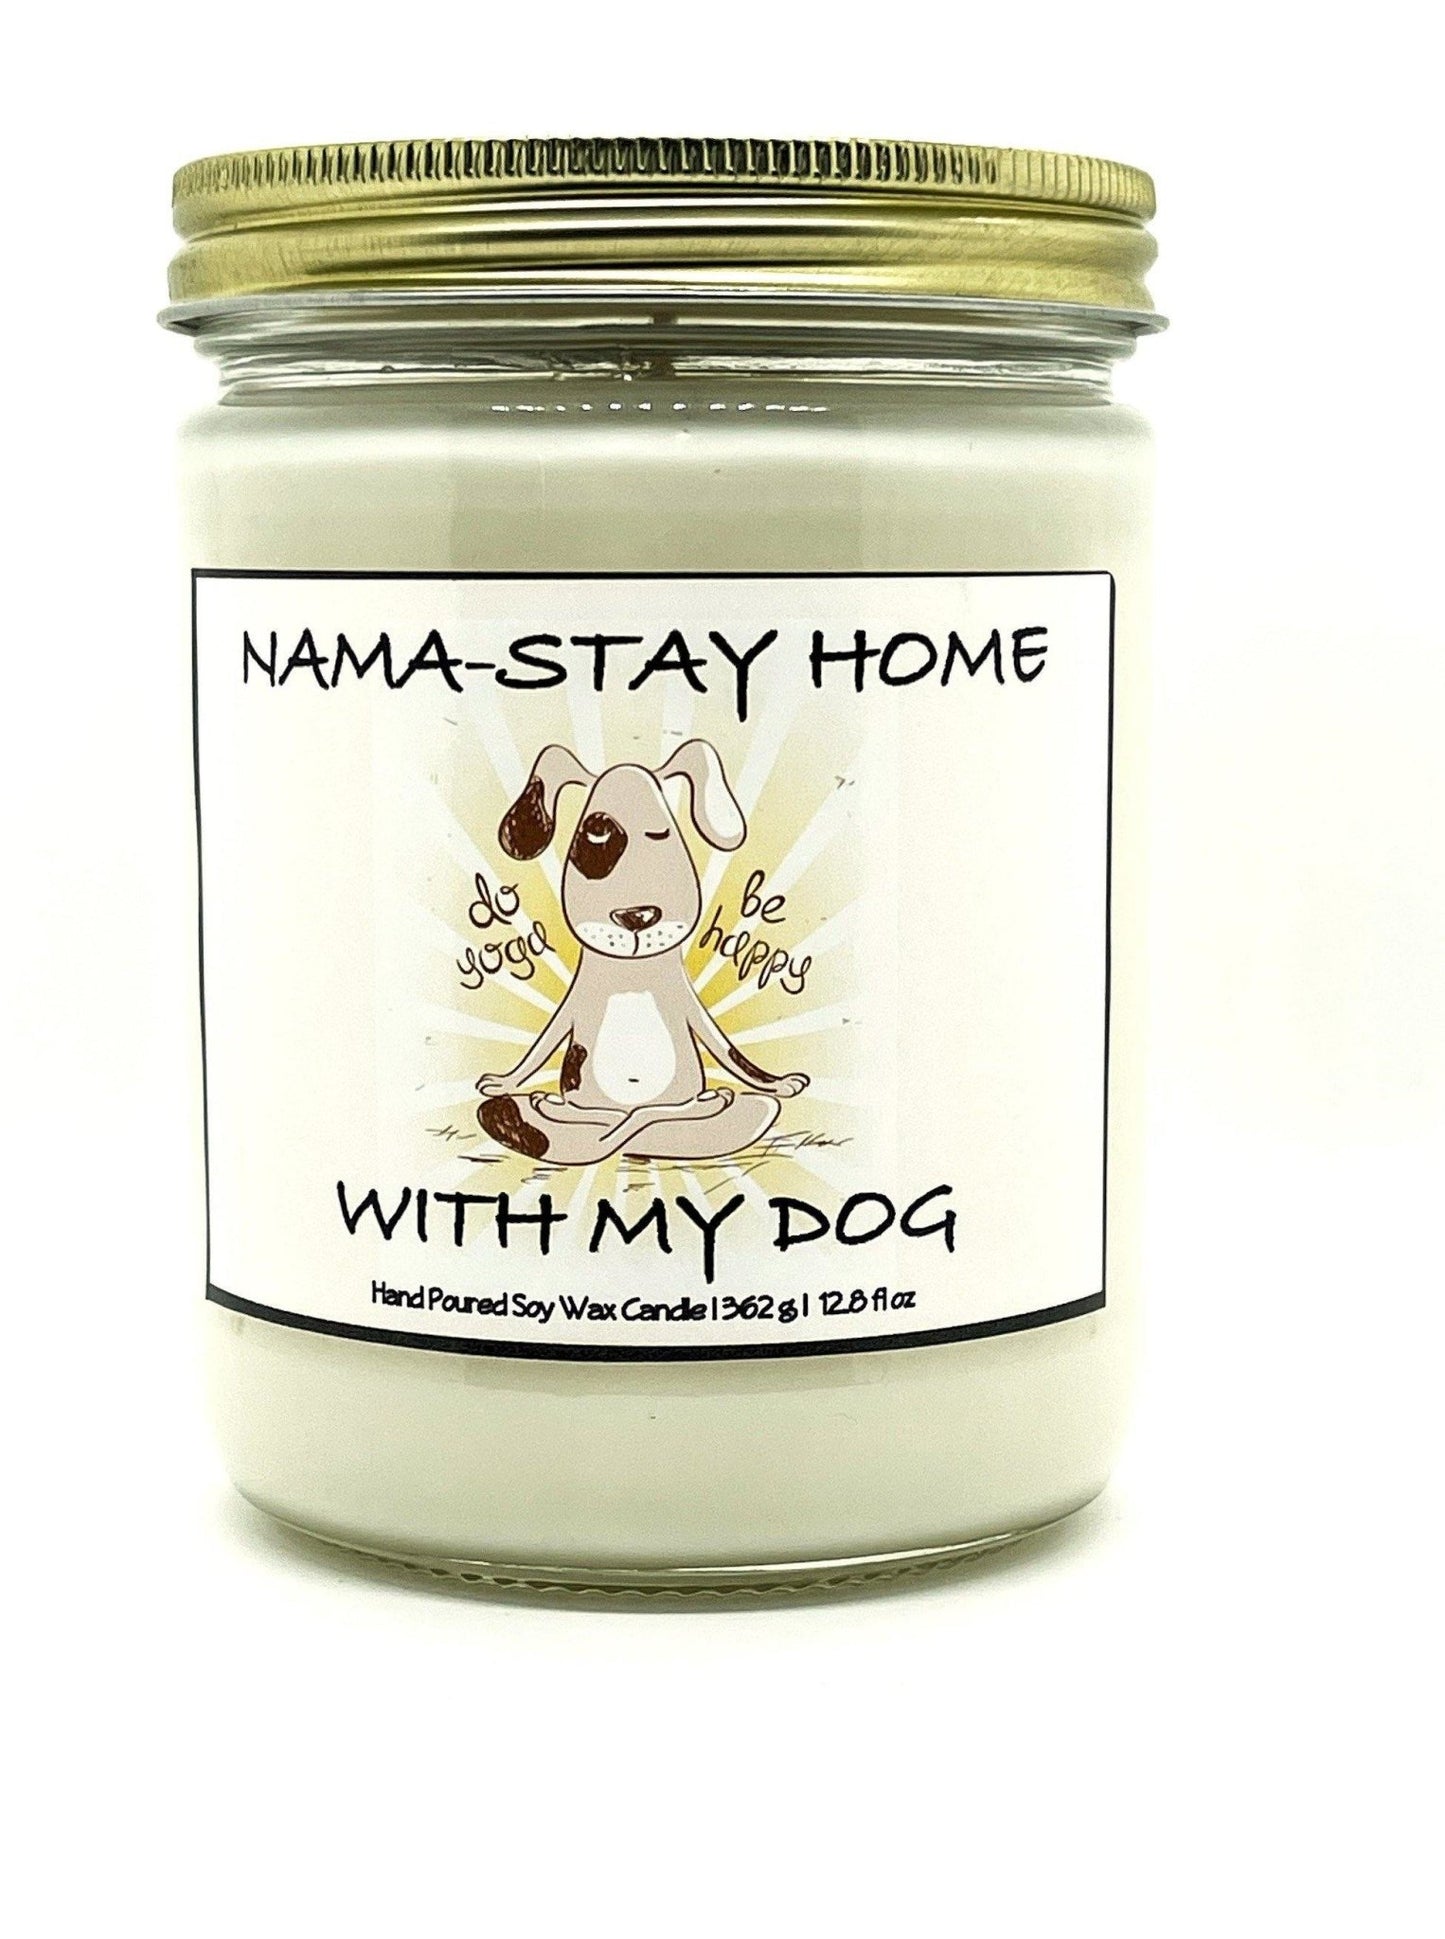 Nama-stay Candle - Wicks+Paws Candle Co